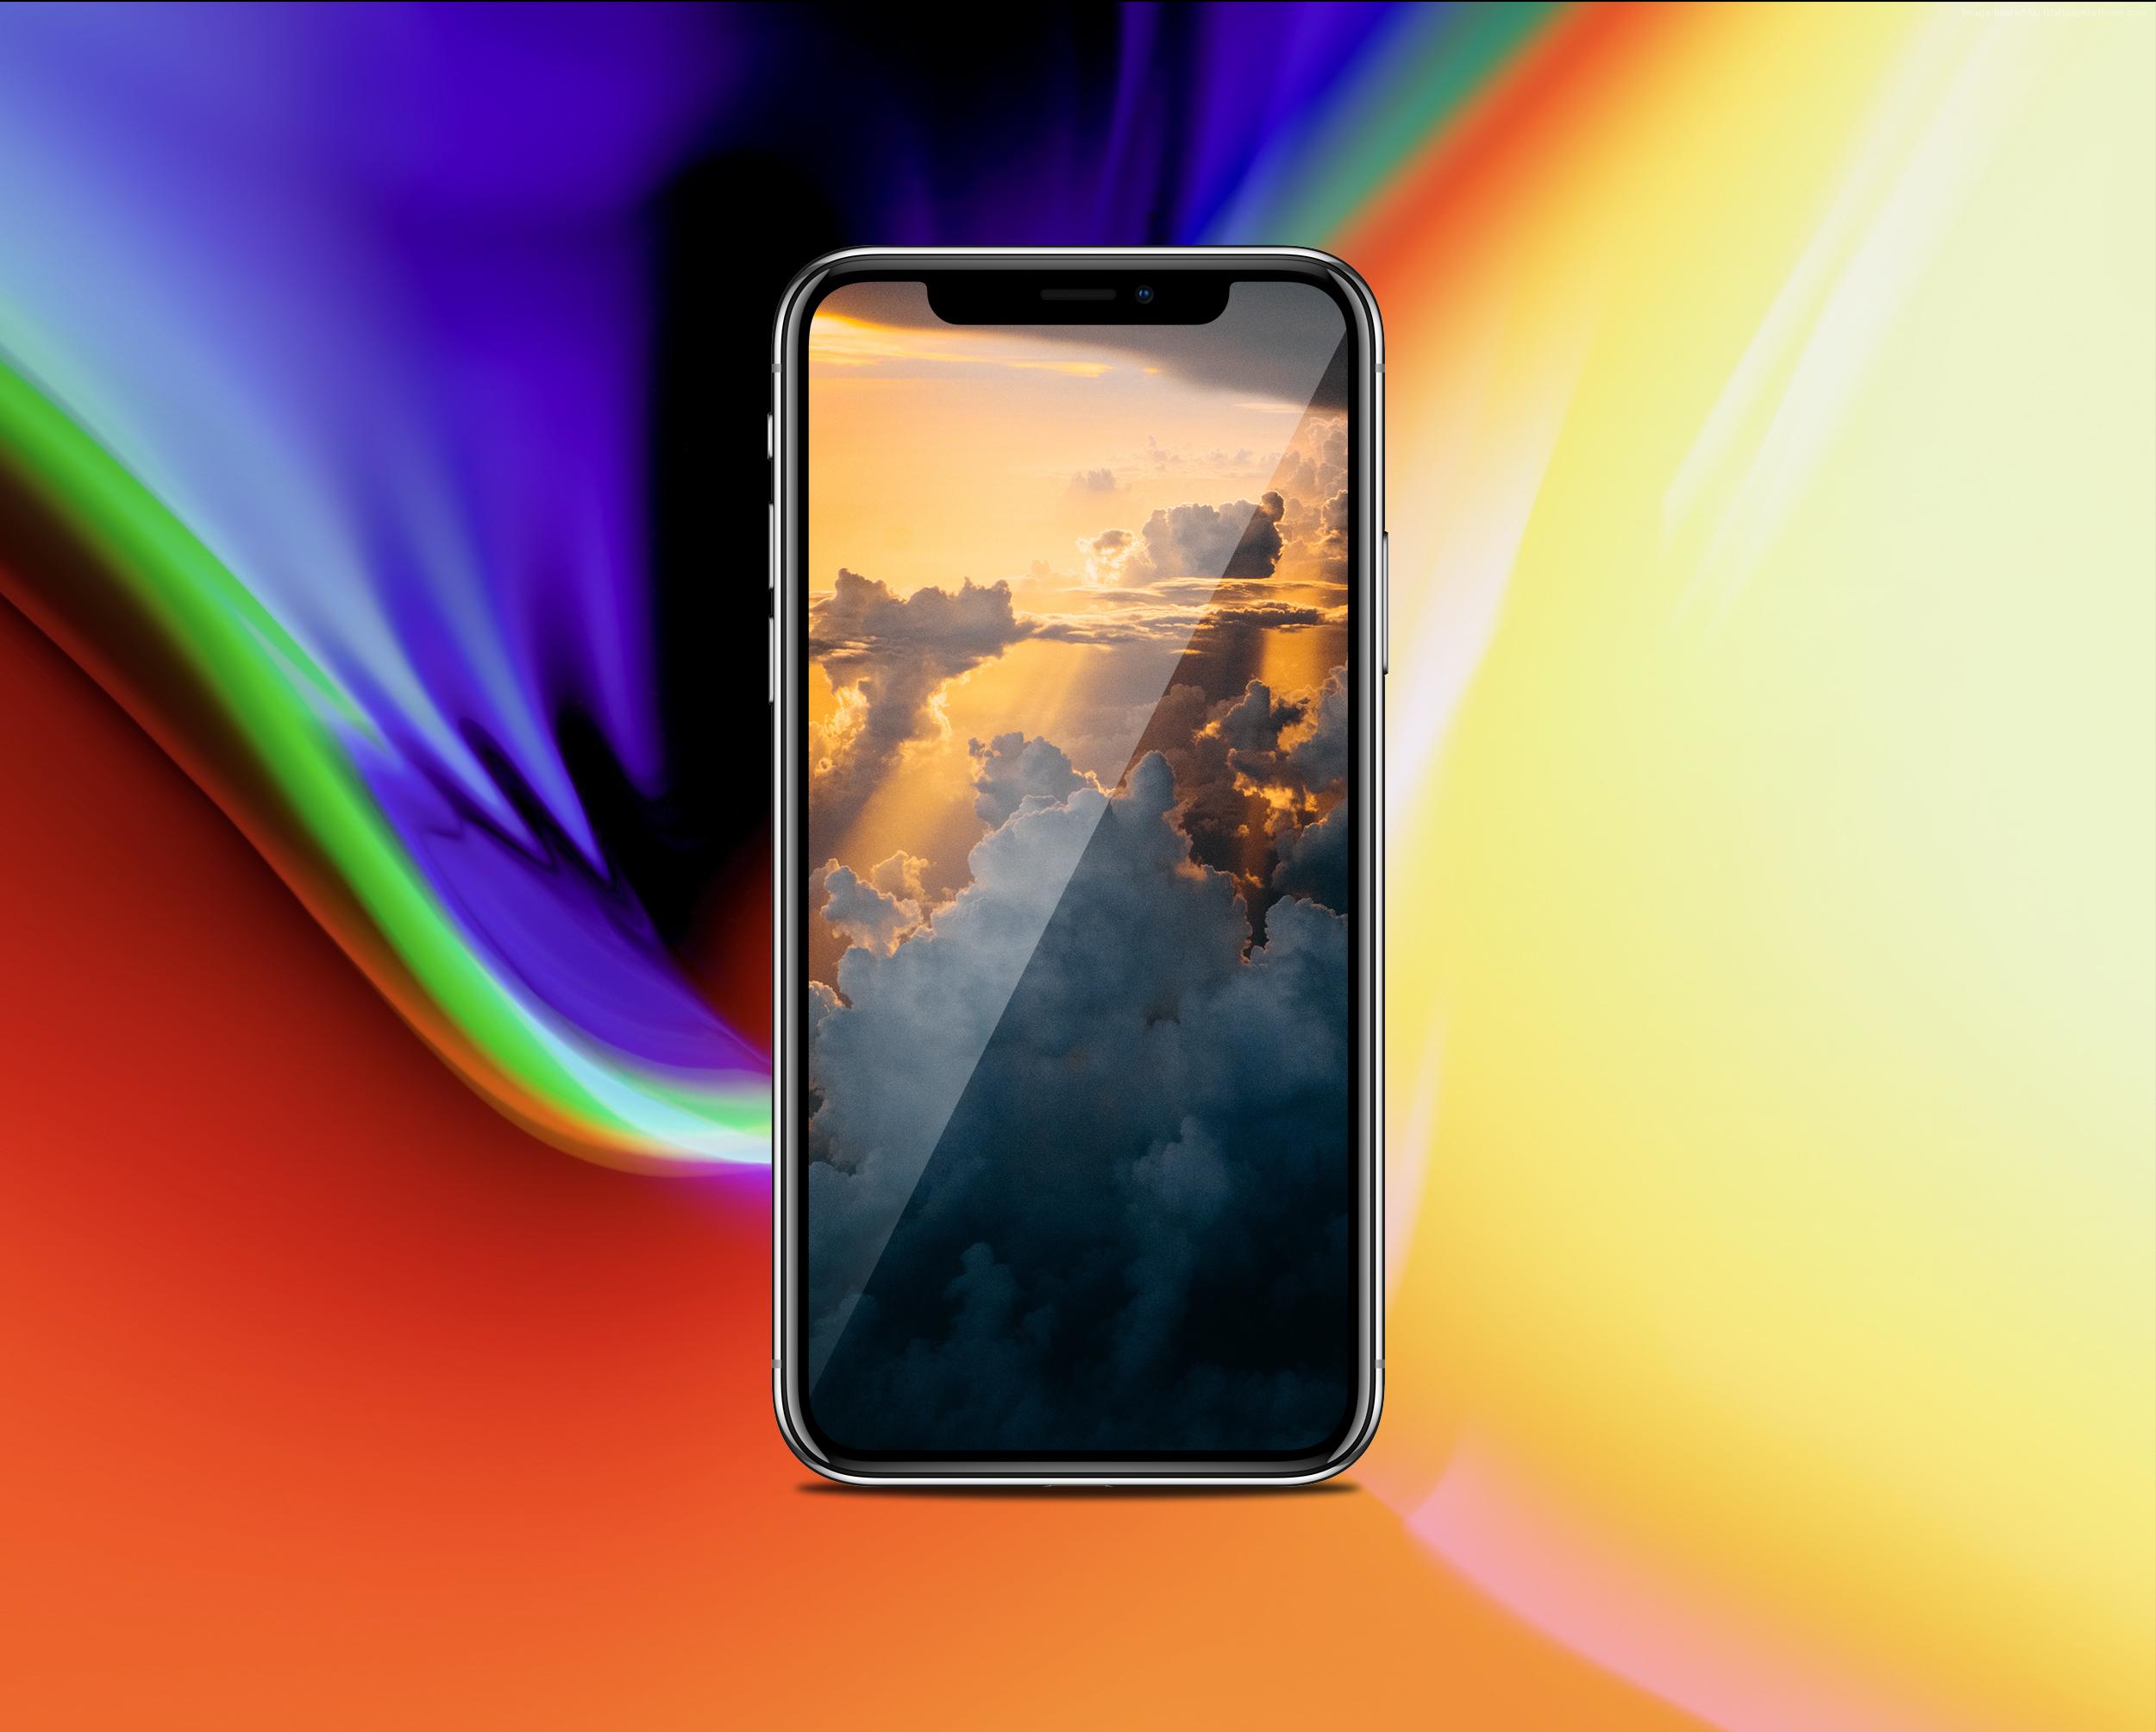 Iphone X Wallpapers Lockscreen Hd For Android Apk Download